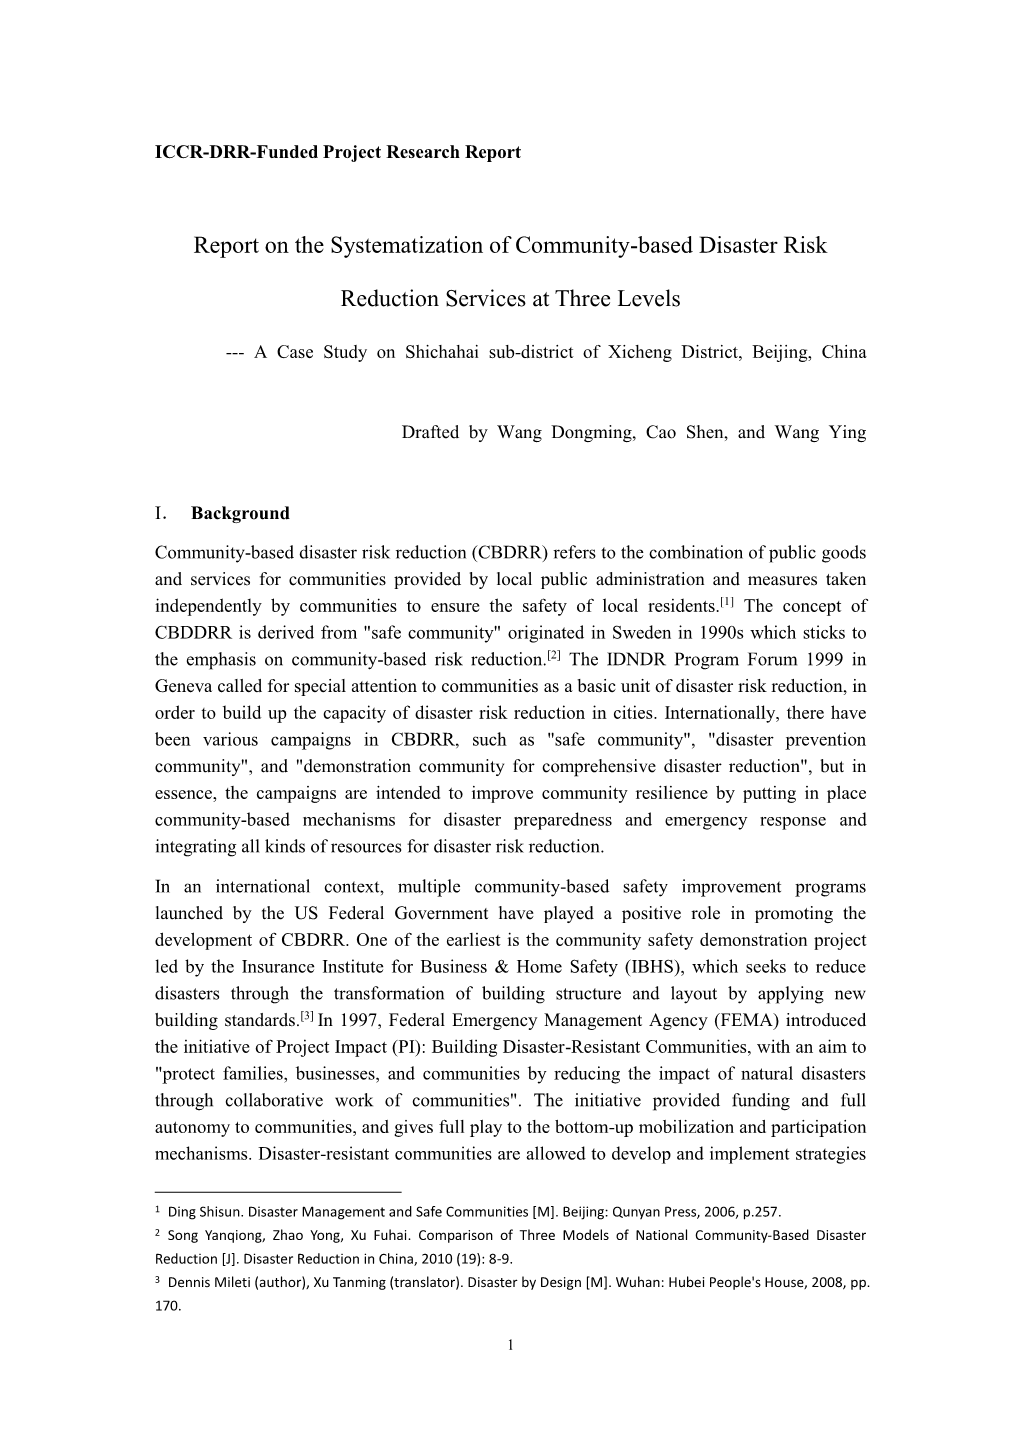 Report on the Systematization of Community-Based Disaster Risk Reduction Services at Three Levels